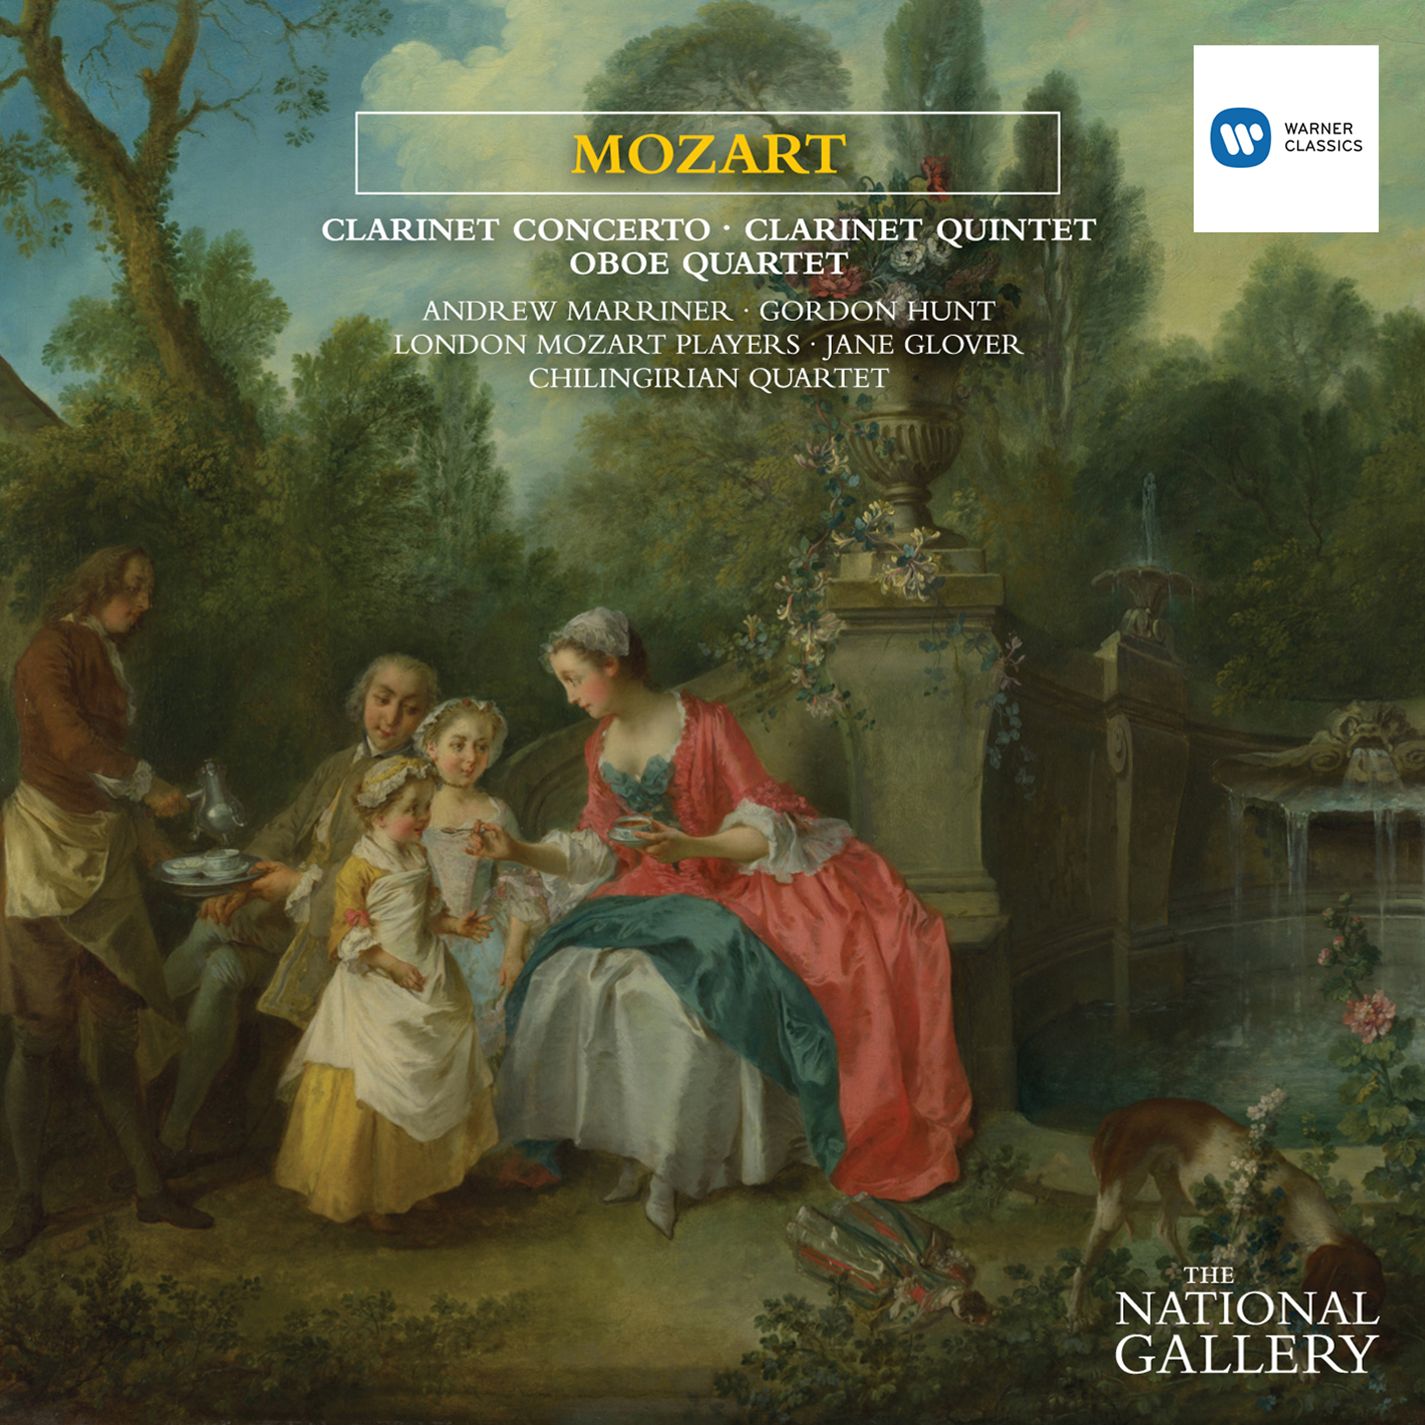 Mozart Clarinet Concerto & Quintet, Oboe Quartet [The National Gallery Collection] (The National Gallery Collection)